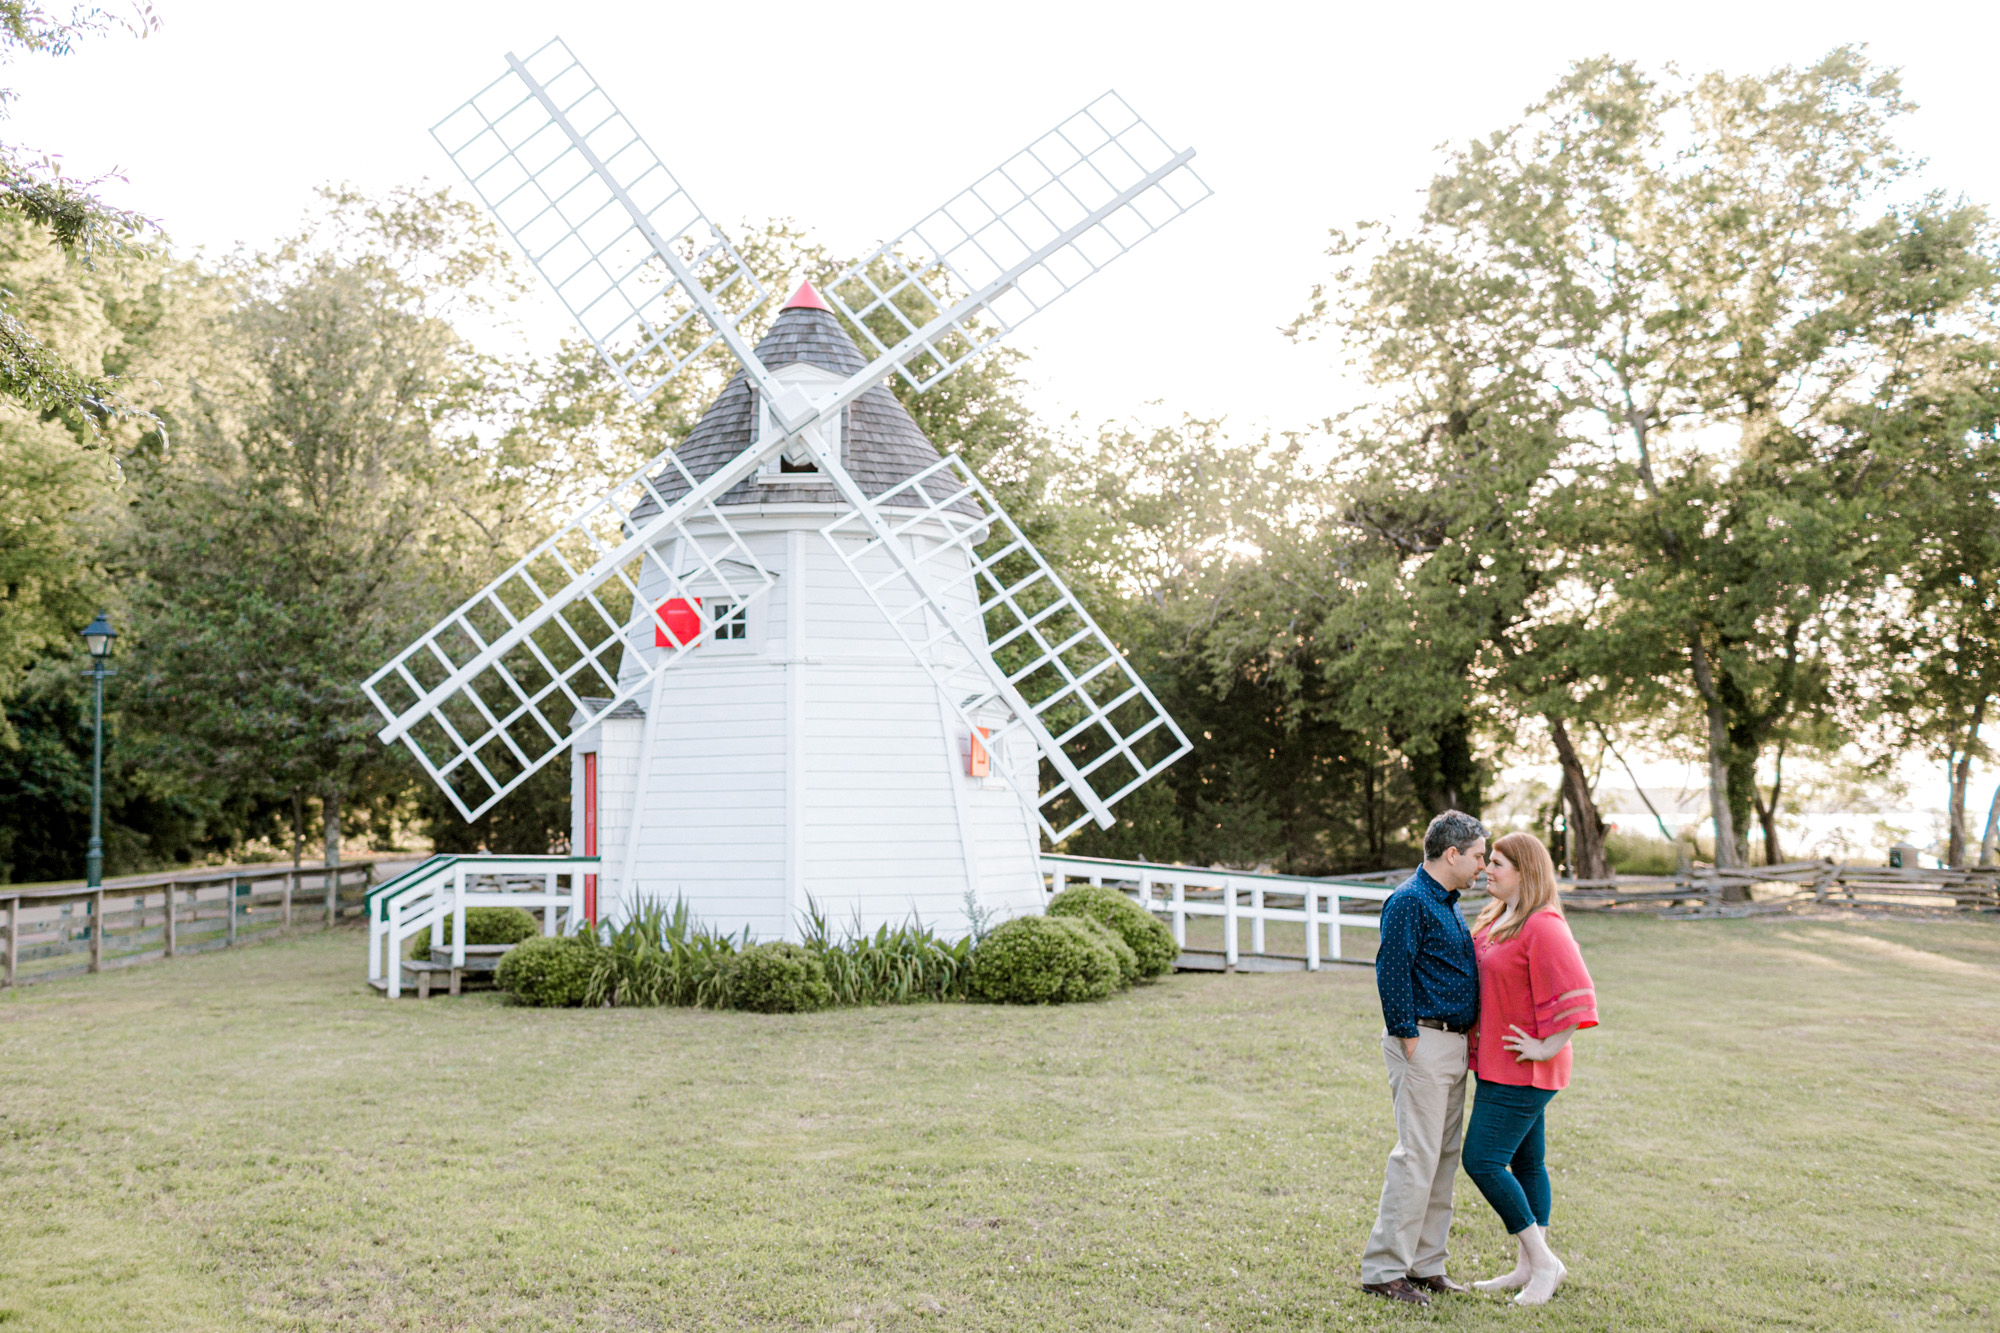 couple with windmill